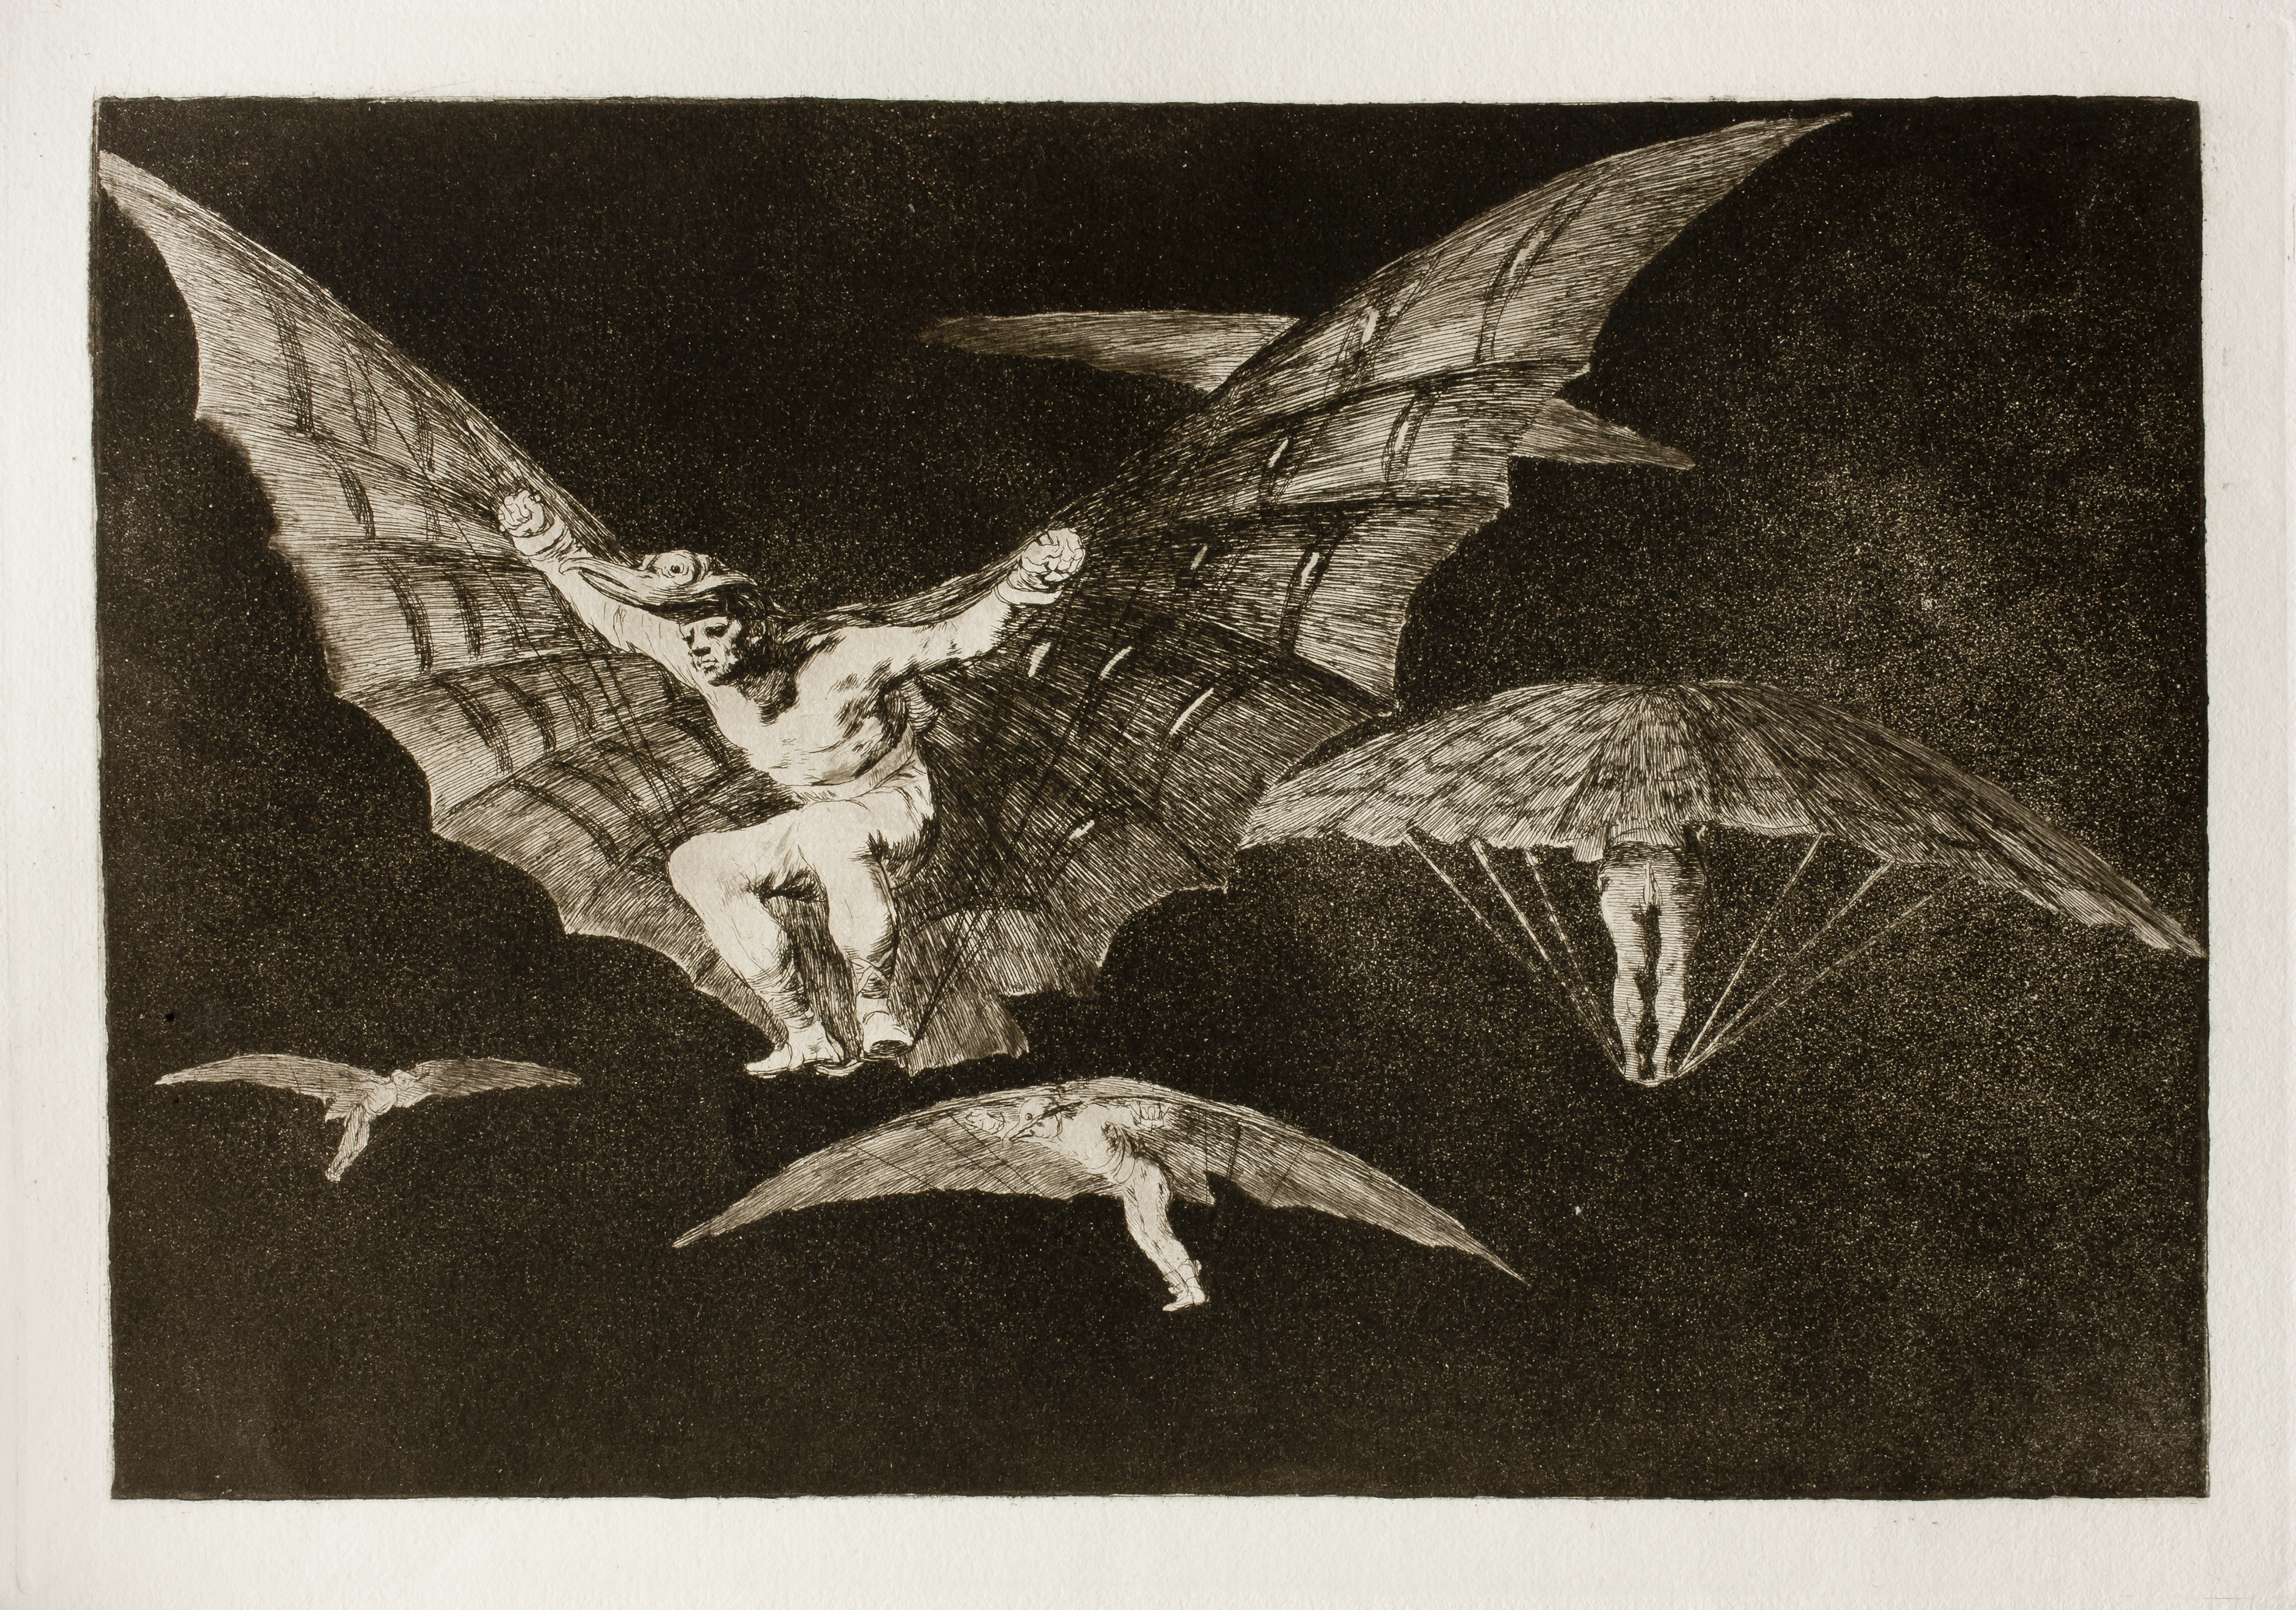 A Way of Flying by Francisco Goya - 1823 - 24.7 x 35.9 cm private collection